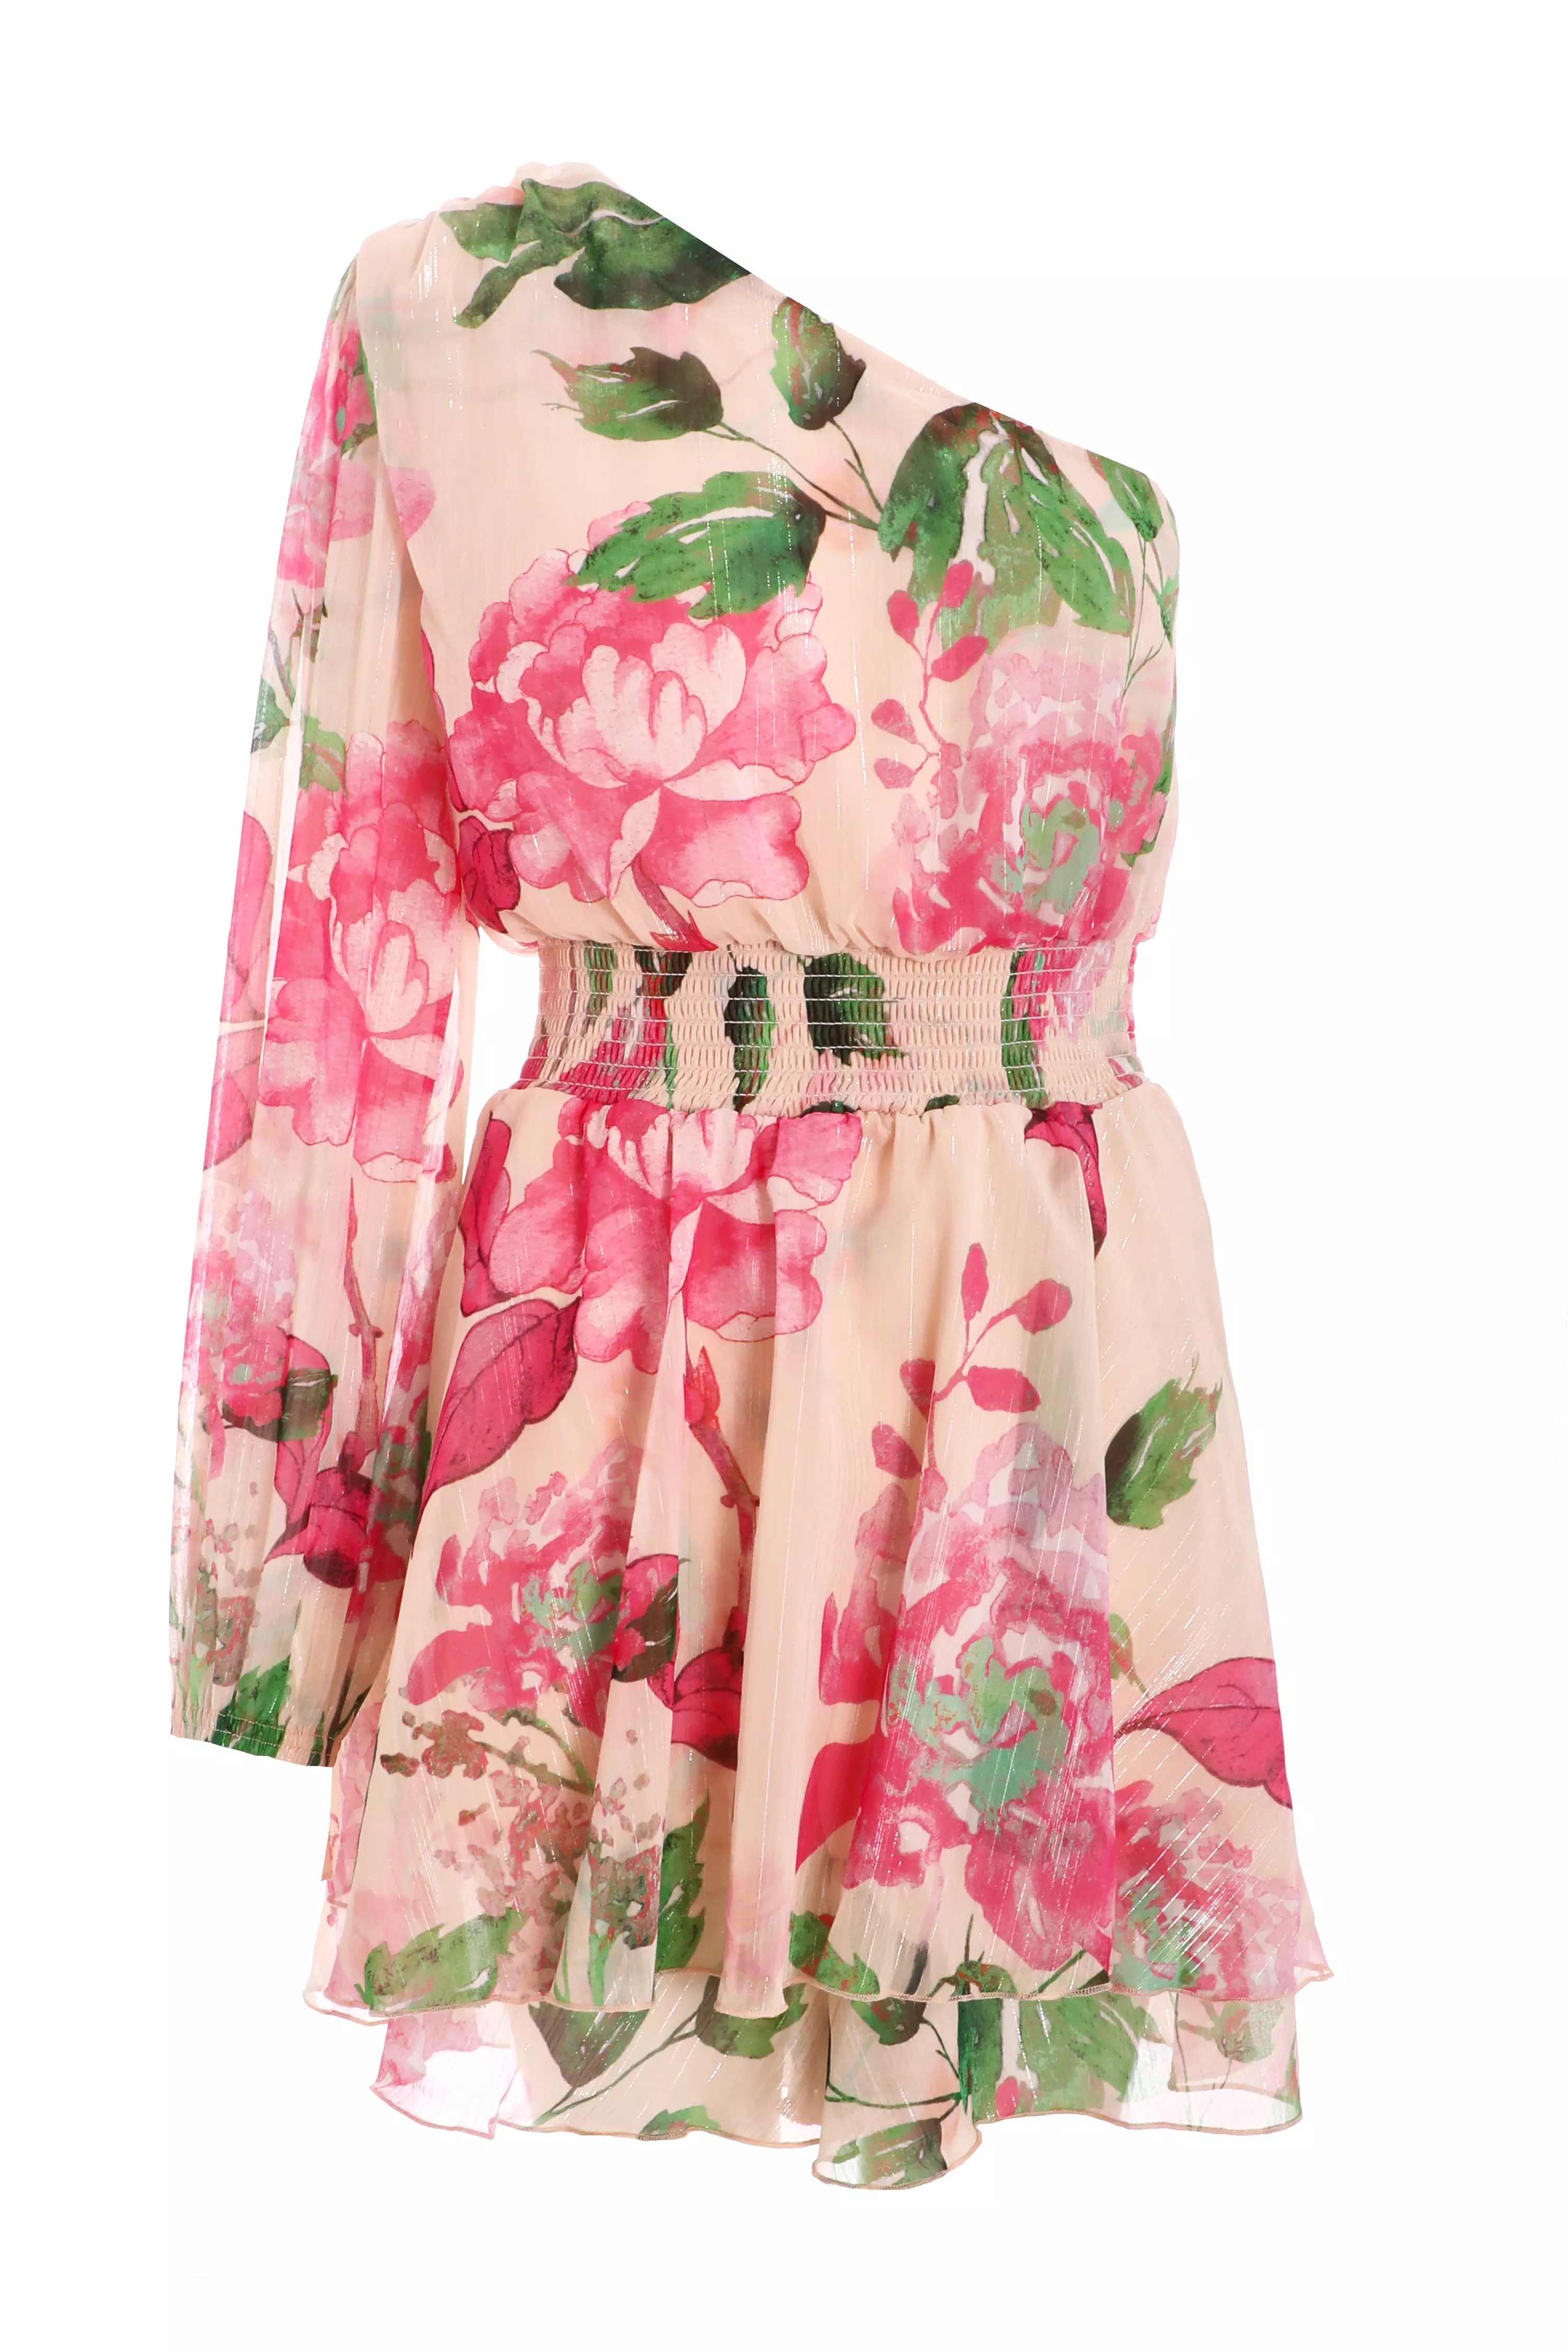 Nude Floral One Shoulder Chiffon Playsuit